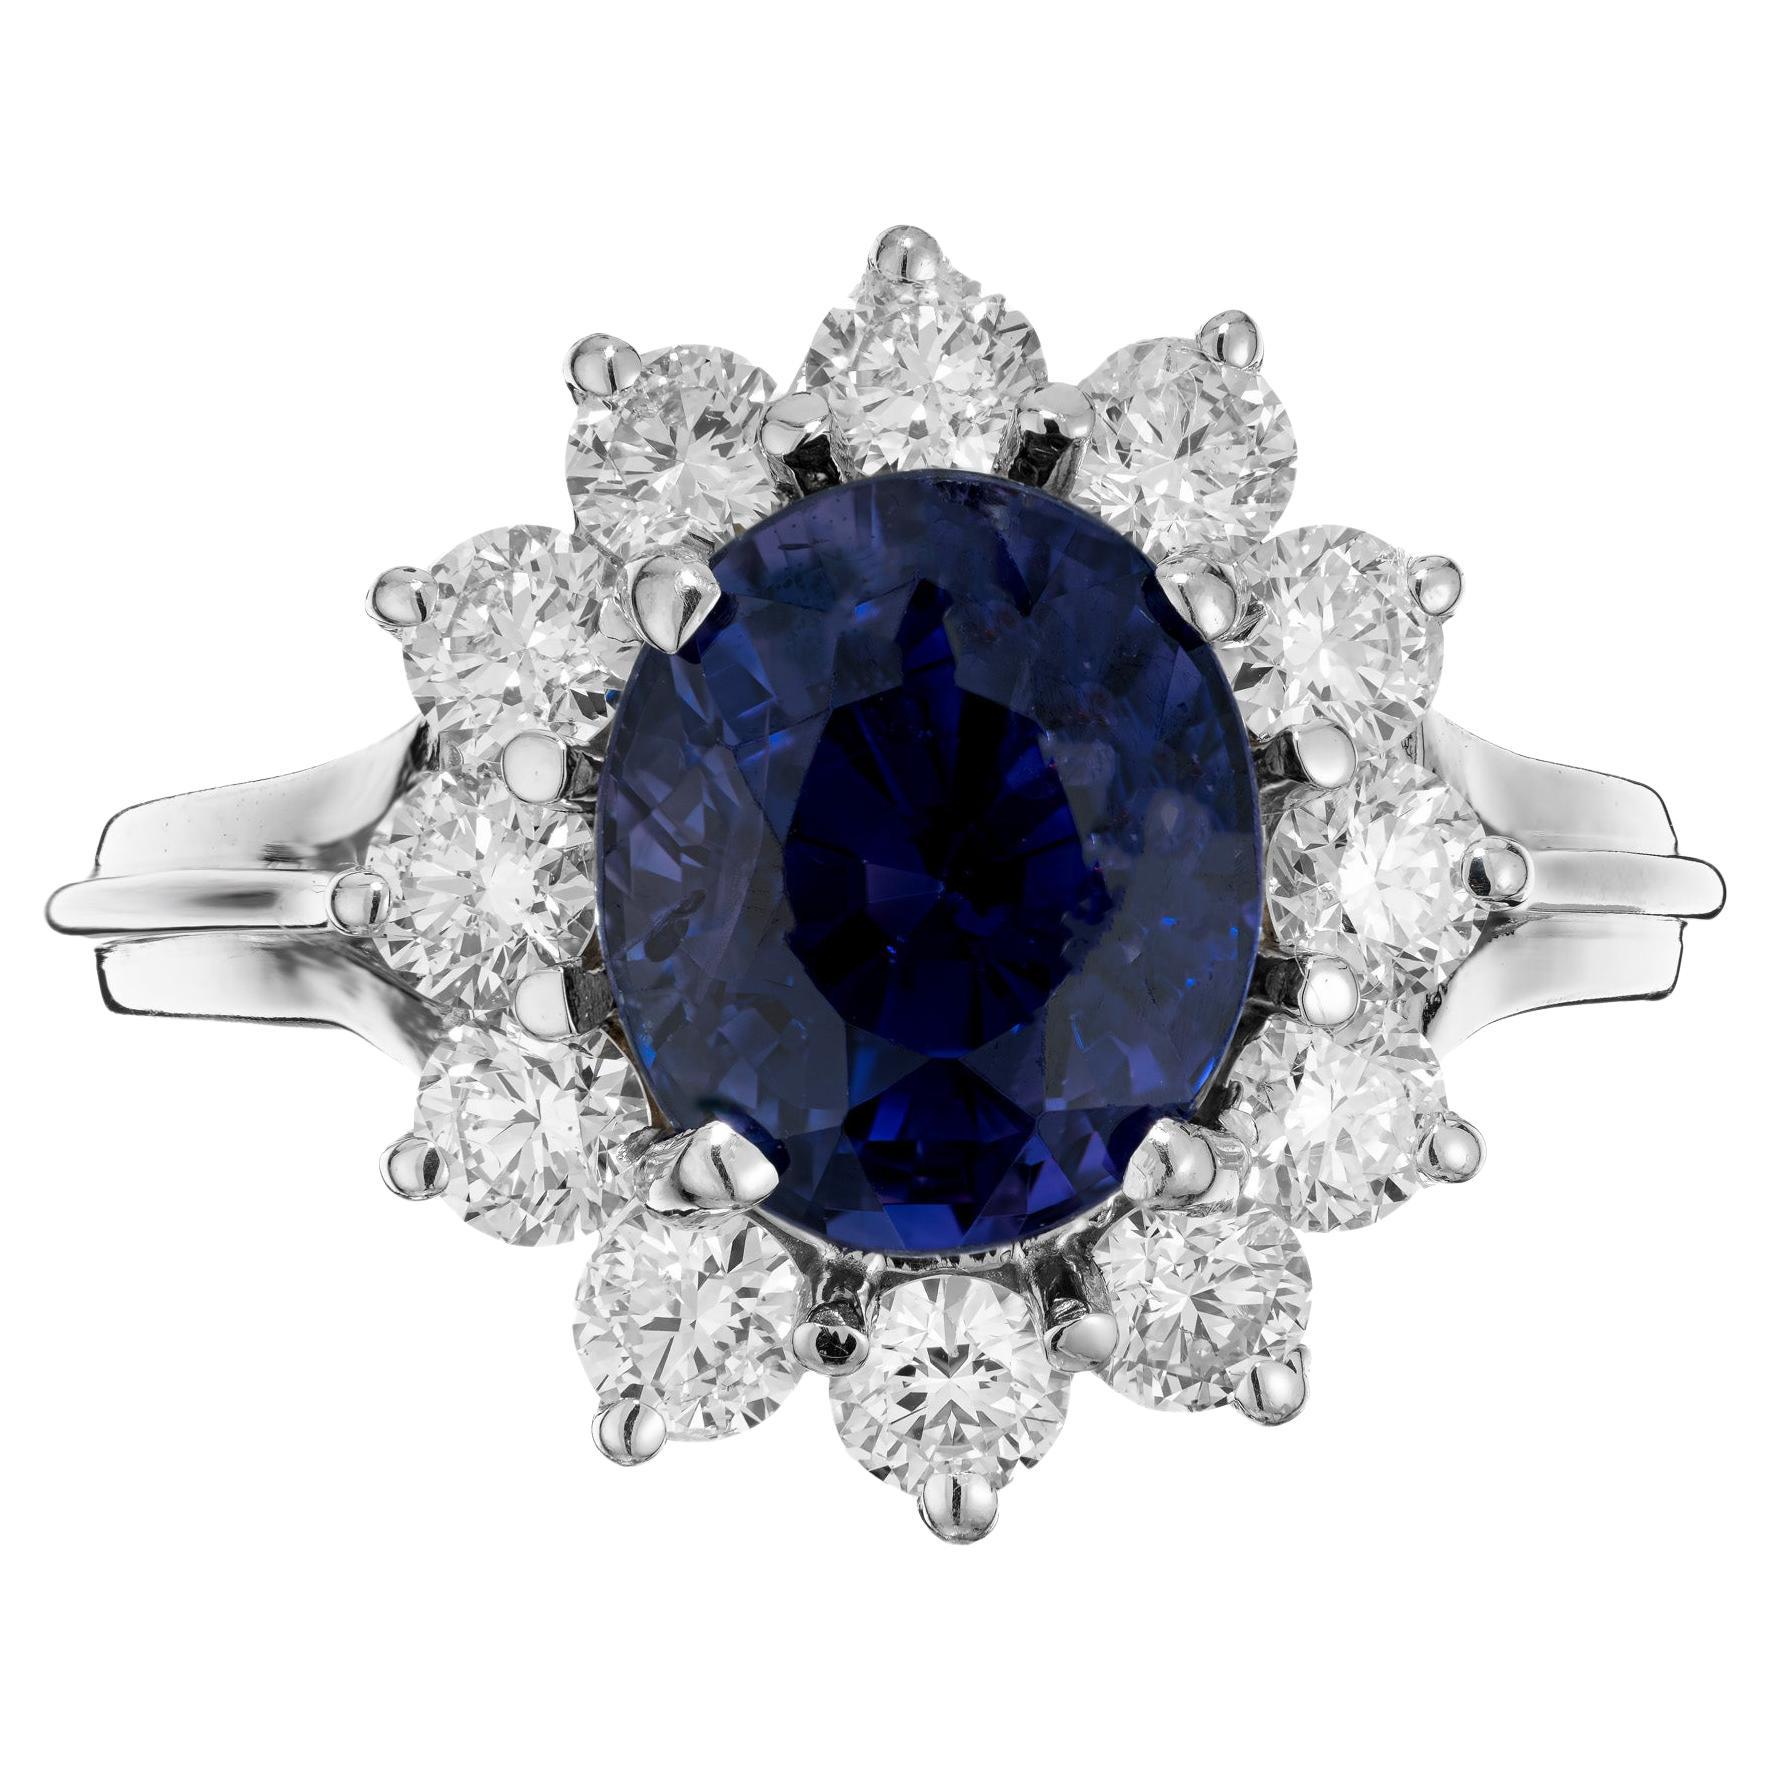  4.31 Carat Oval Sapphire Diamond Halo White Gold Mid-Century Engagement Ring For Sale